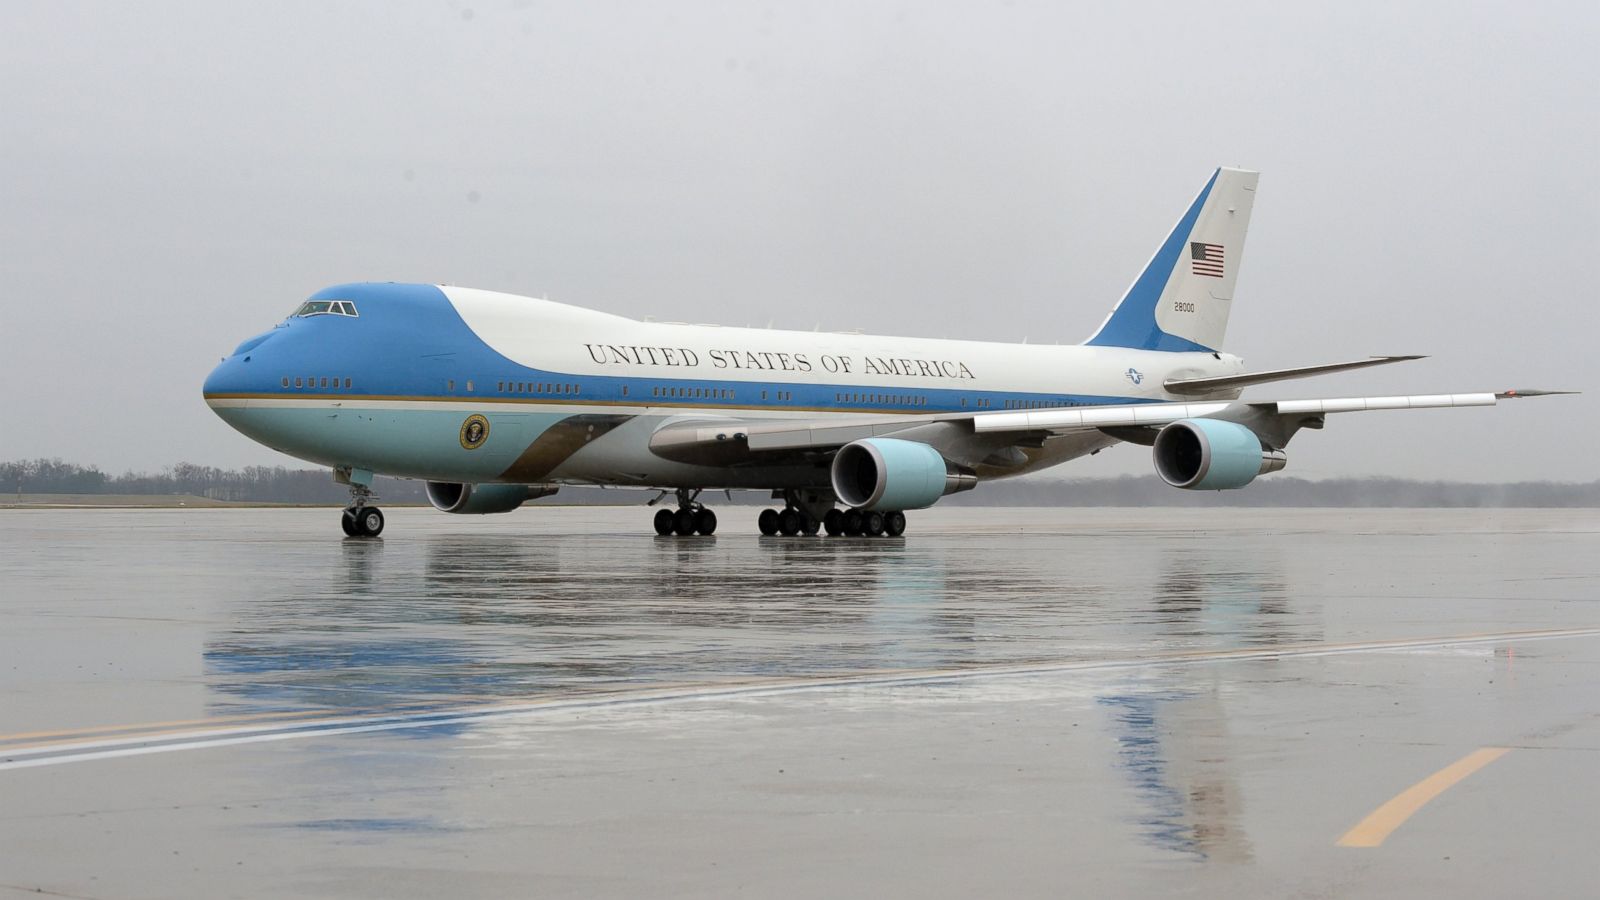 Trump cancels next Air Force one